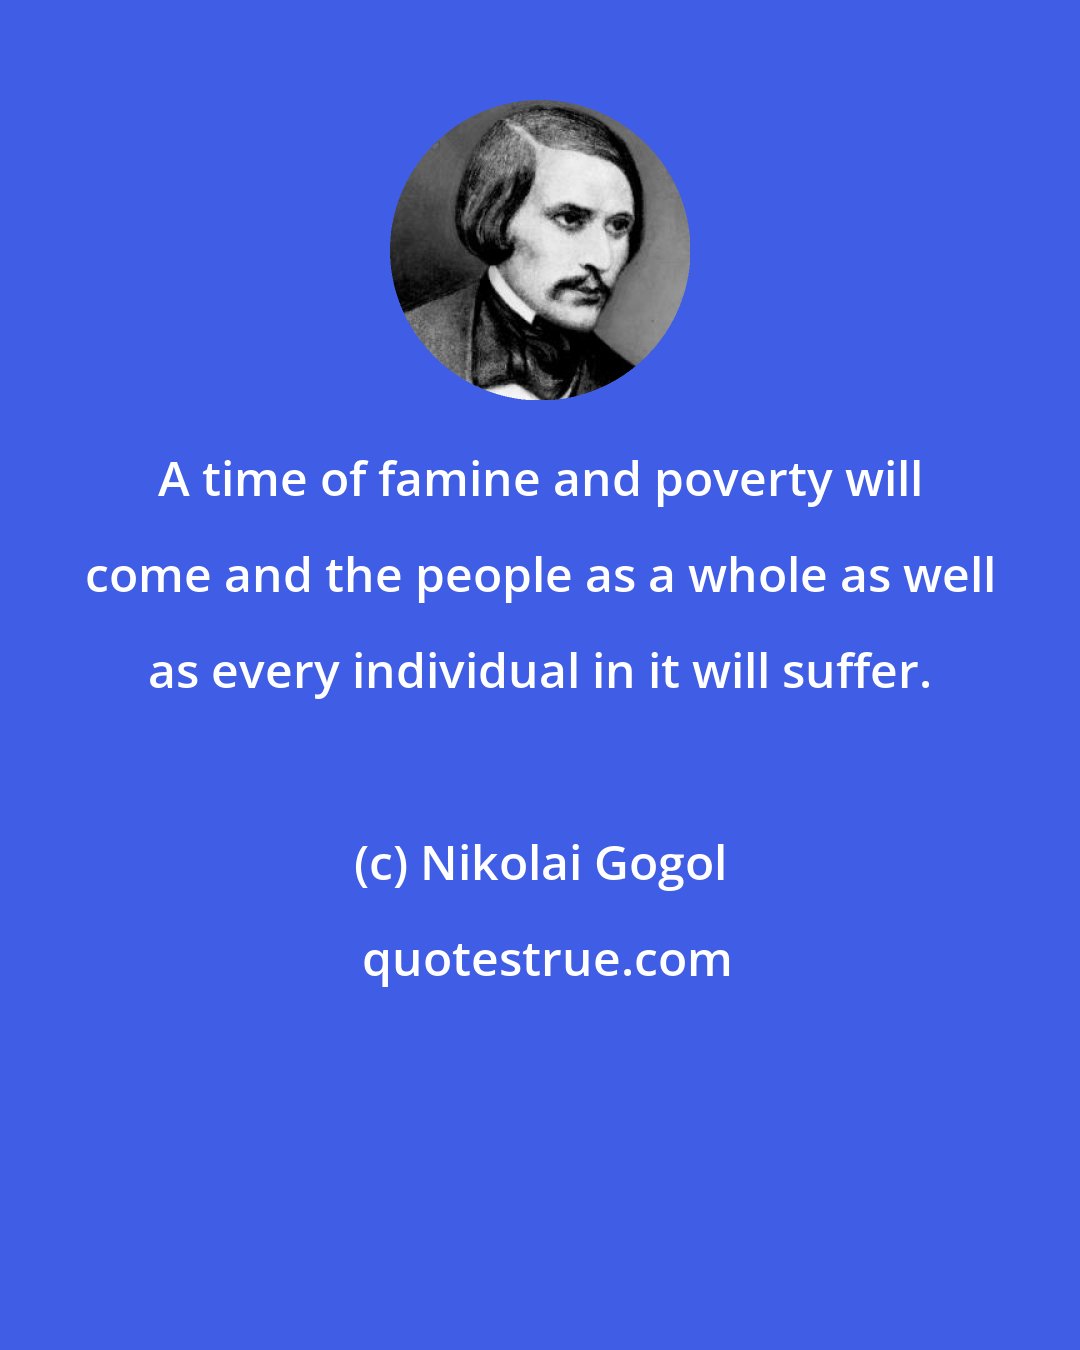 Nikolai Gogol: A time of famine and poverty will come and the people as a whole as well as every individual in it will suffer.